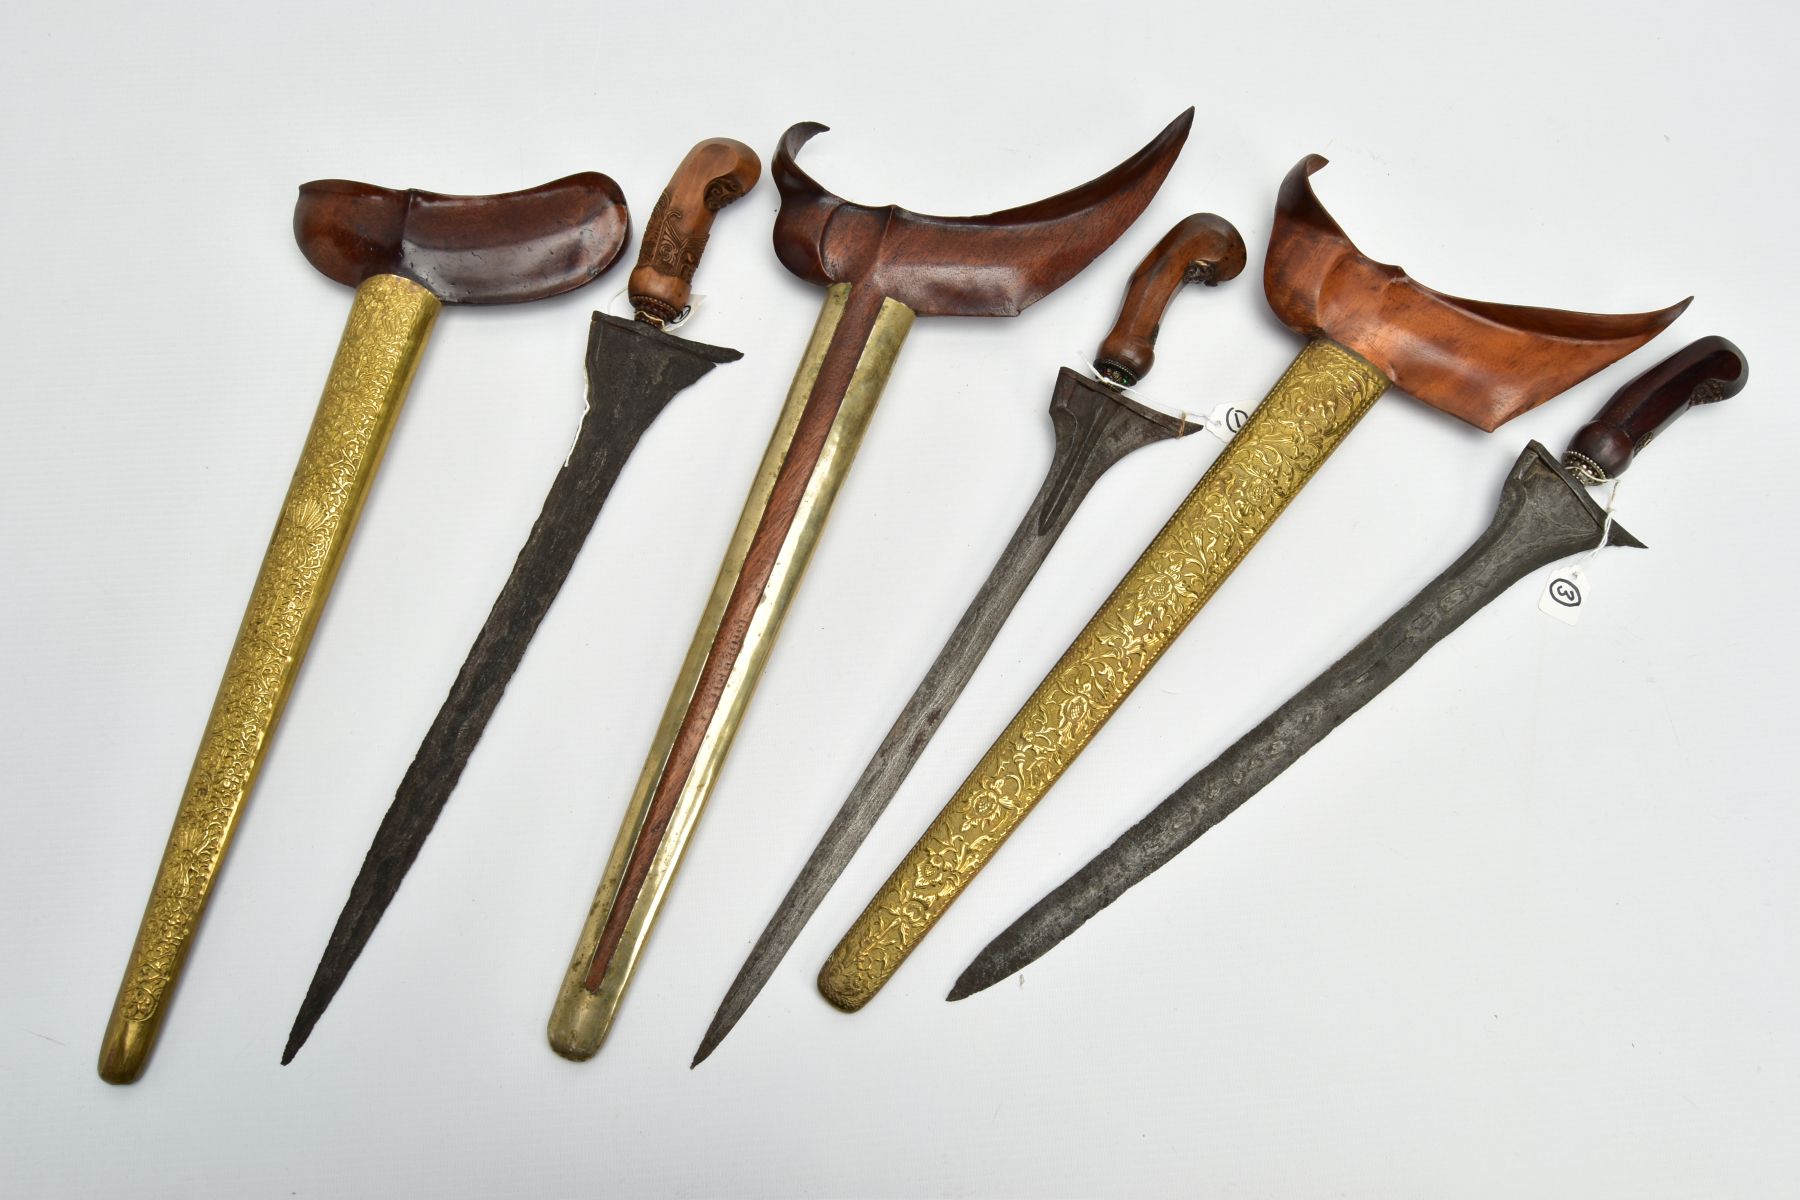 THREE MALAY/INDONESIAN KRIS DAGGERS, all straight blades(bilah), with age, the Bilah are rusted, the - Image 3 of 10